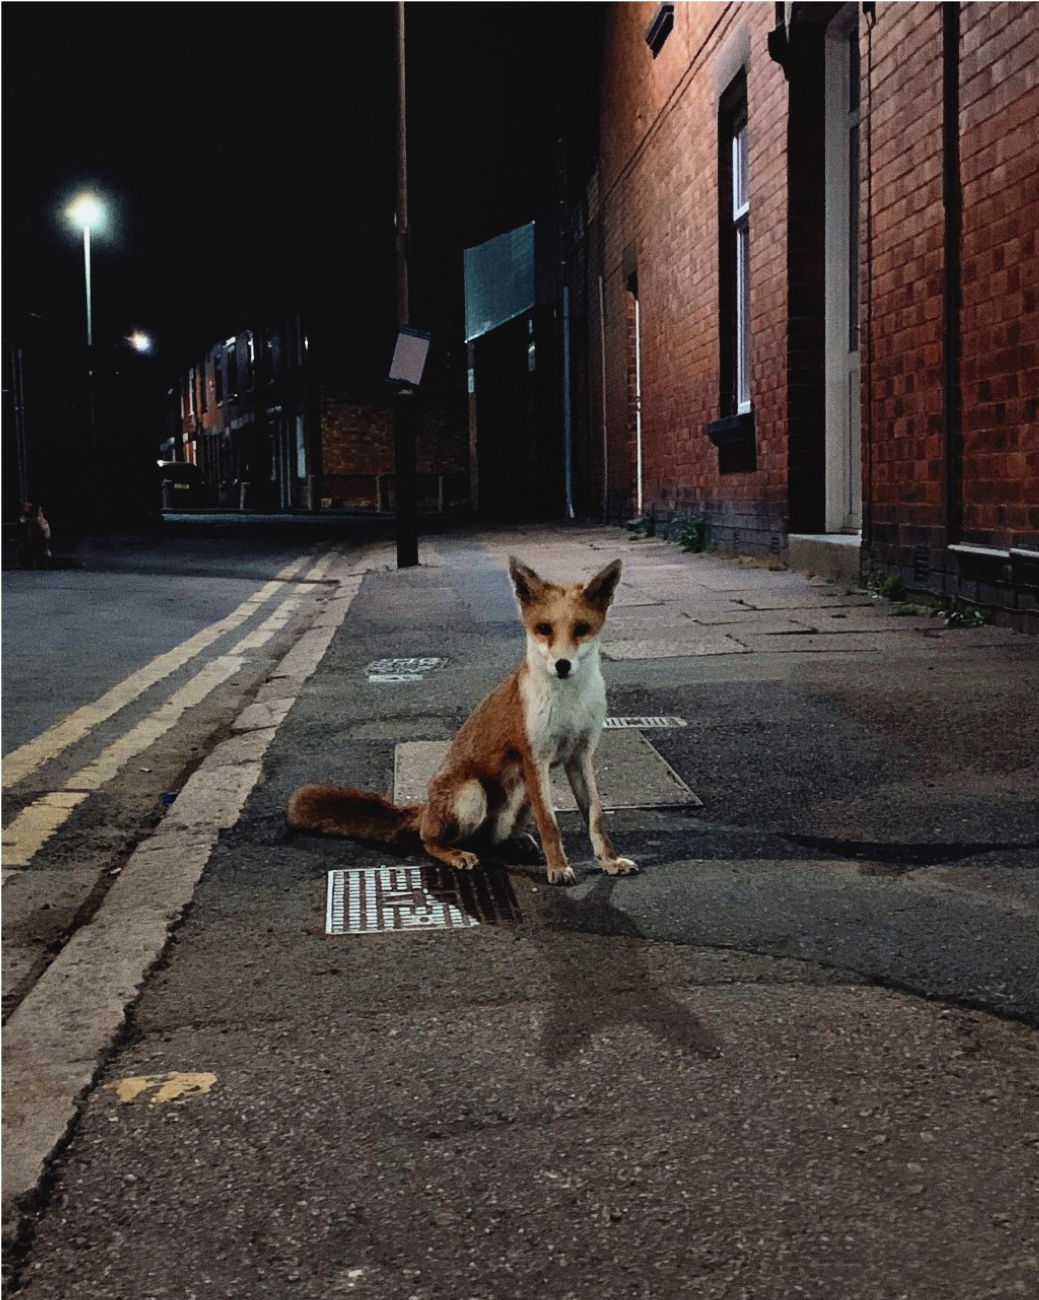 Photo of a red fox in an urban setting